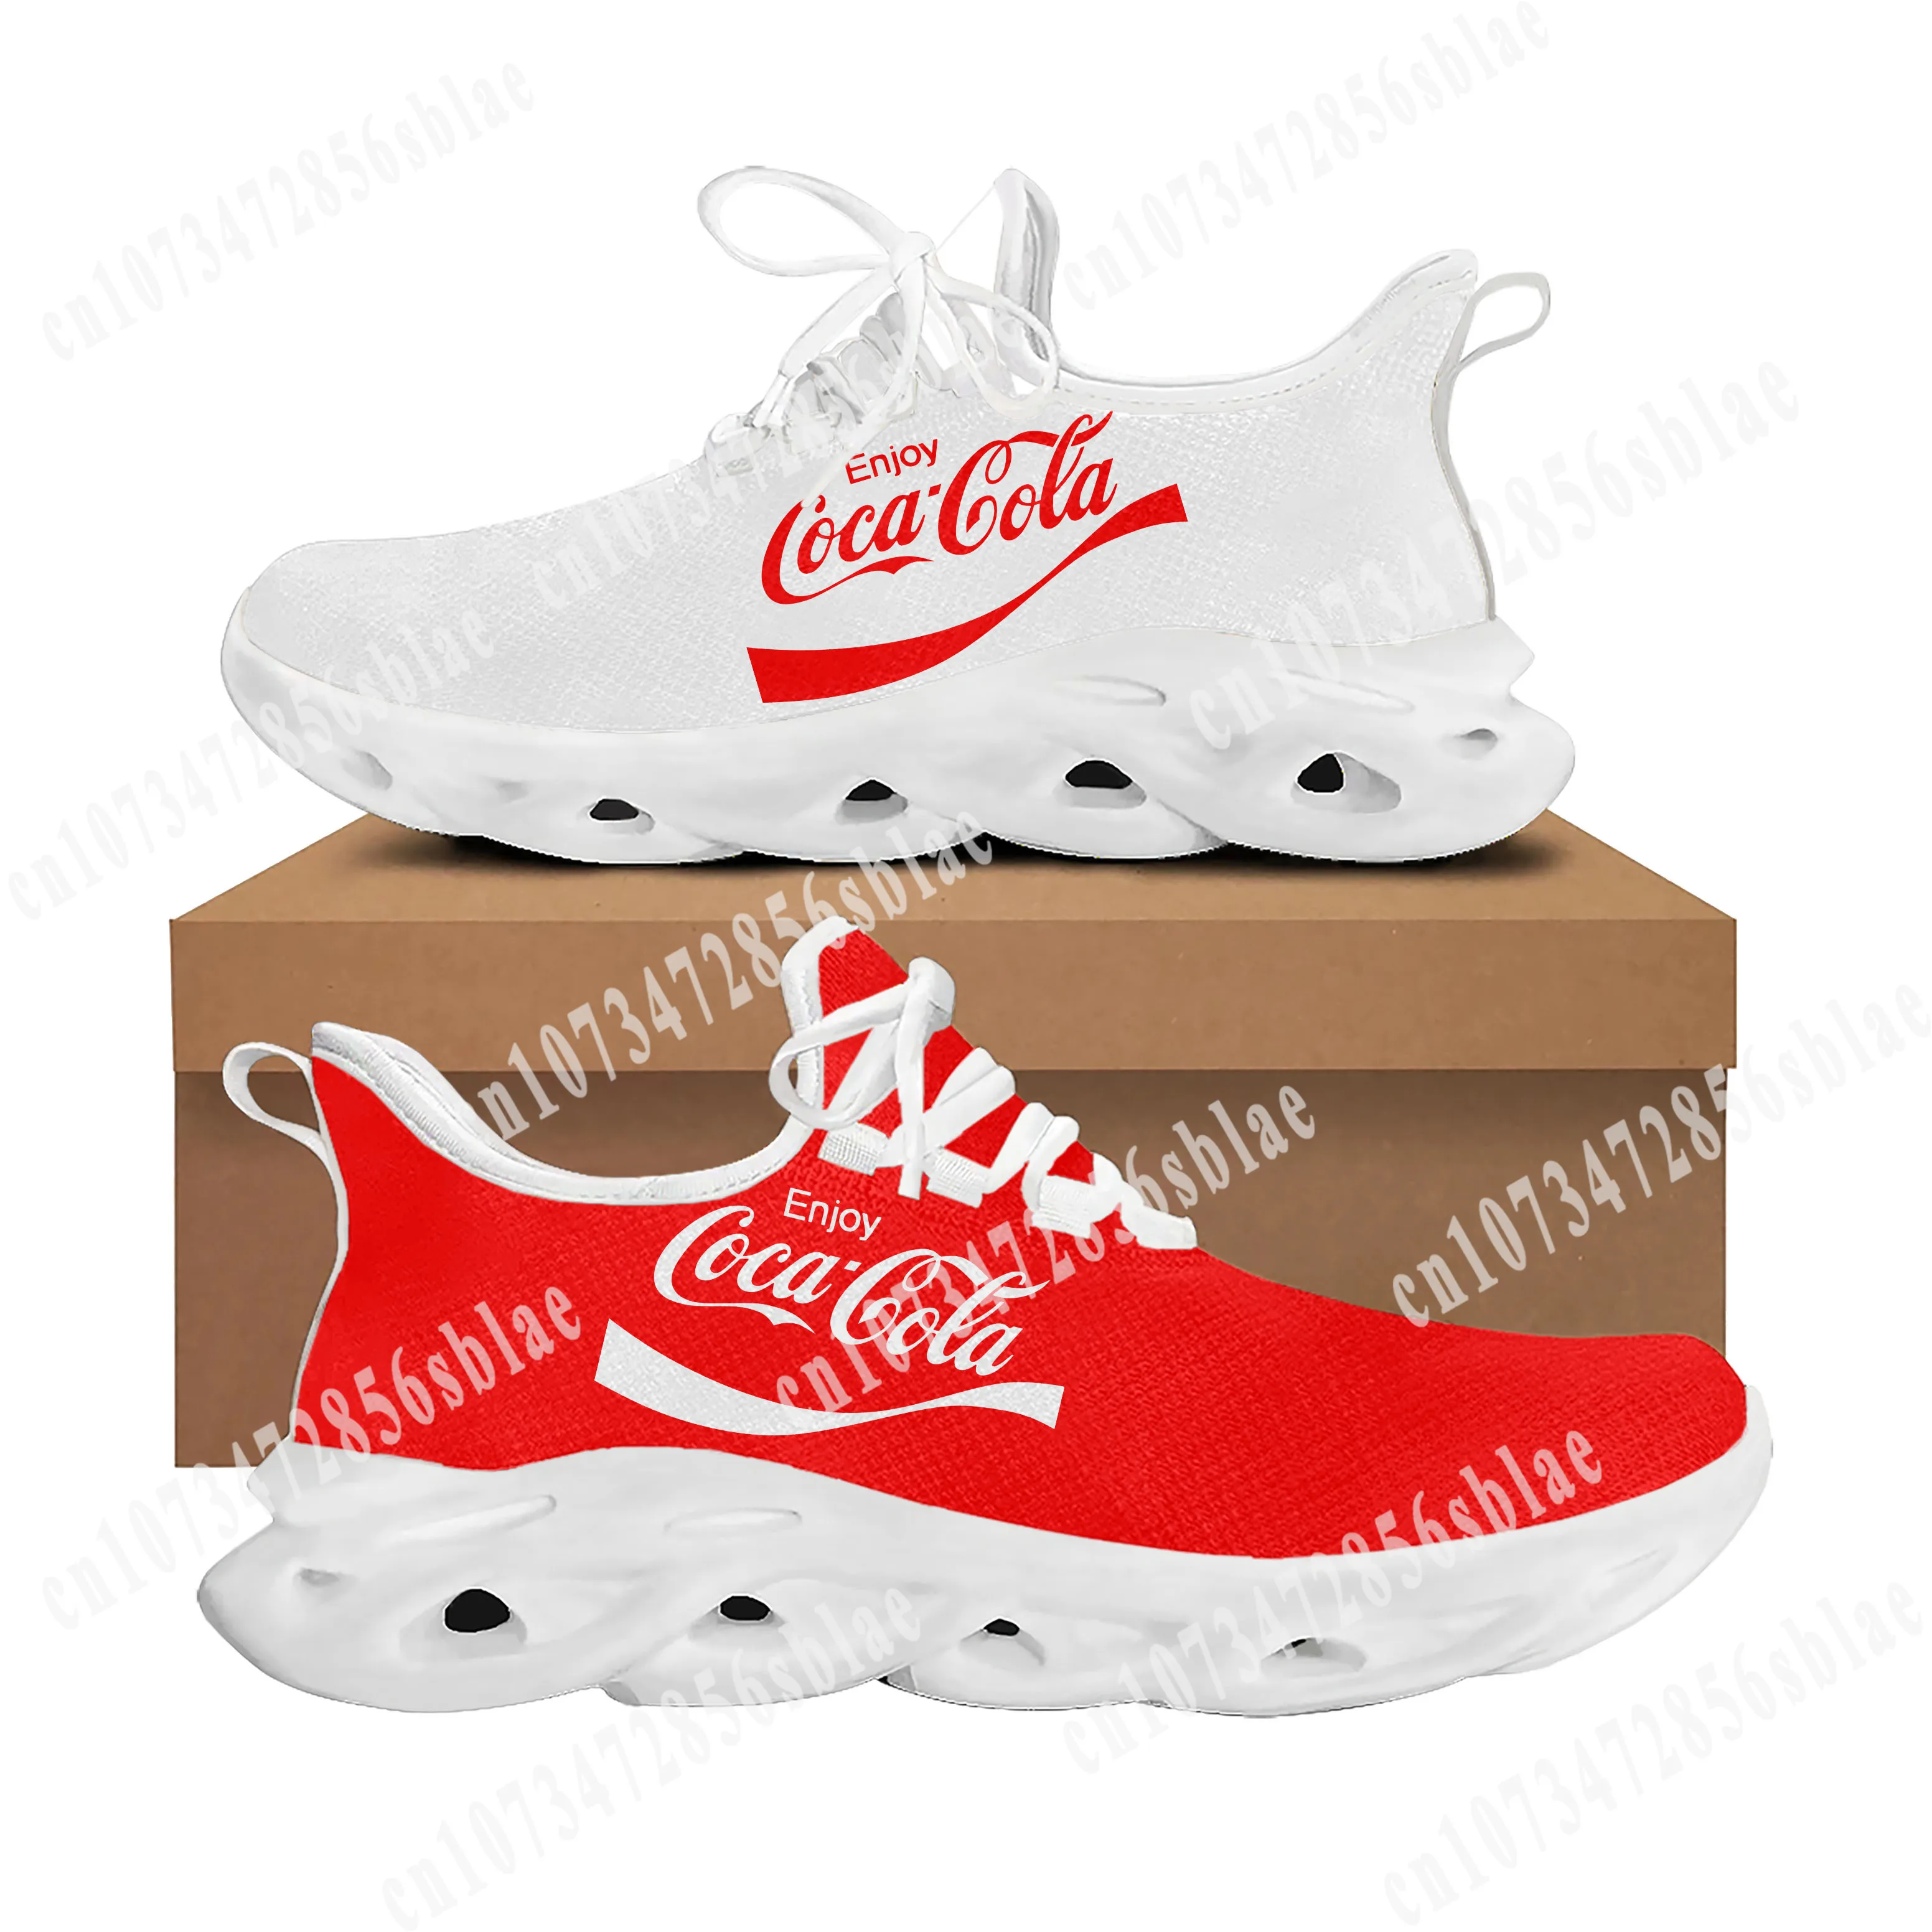 

Coca Flats Sneakers Mens Womens Sports Running Shoes Cola High Quality Sneaker Customization Shoe Lace Up Mesh Footwear White